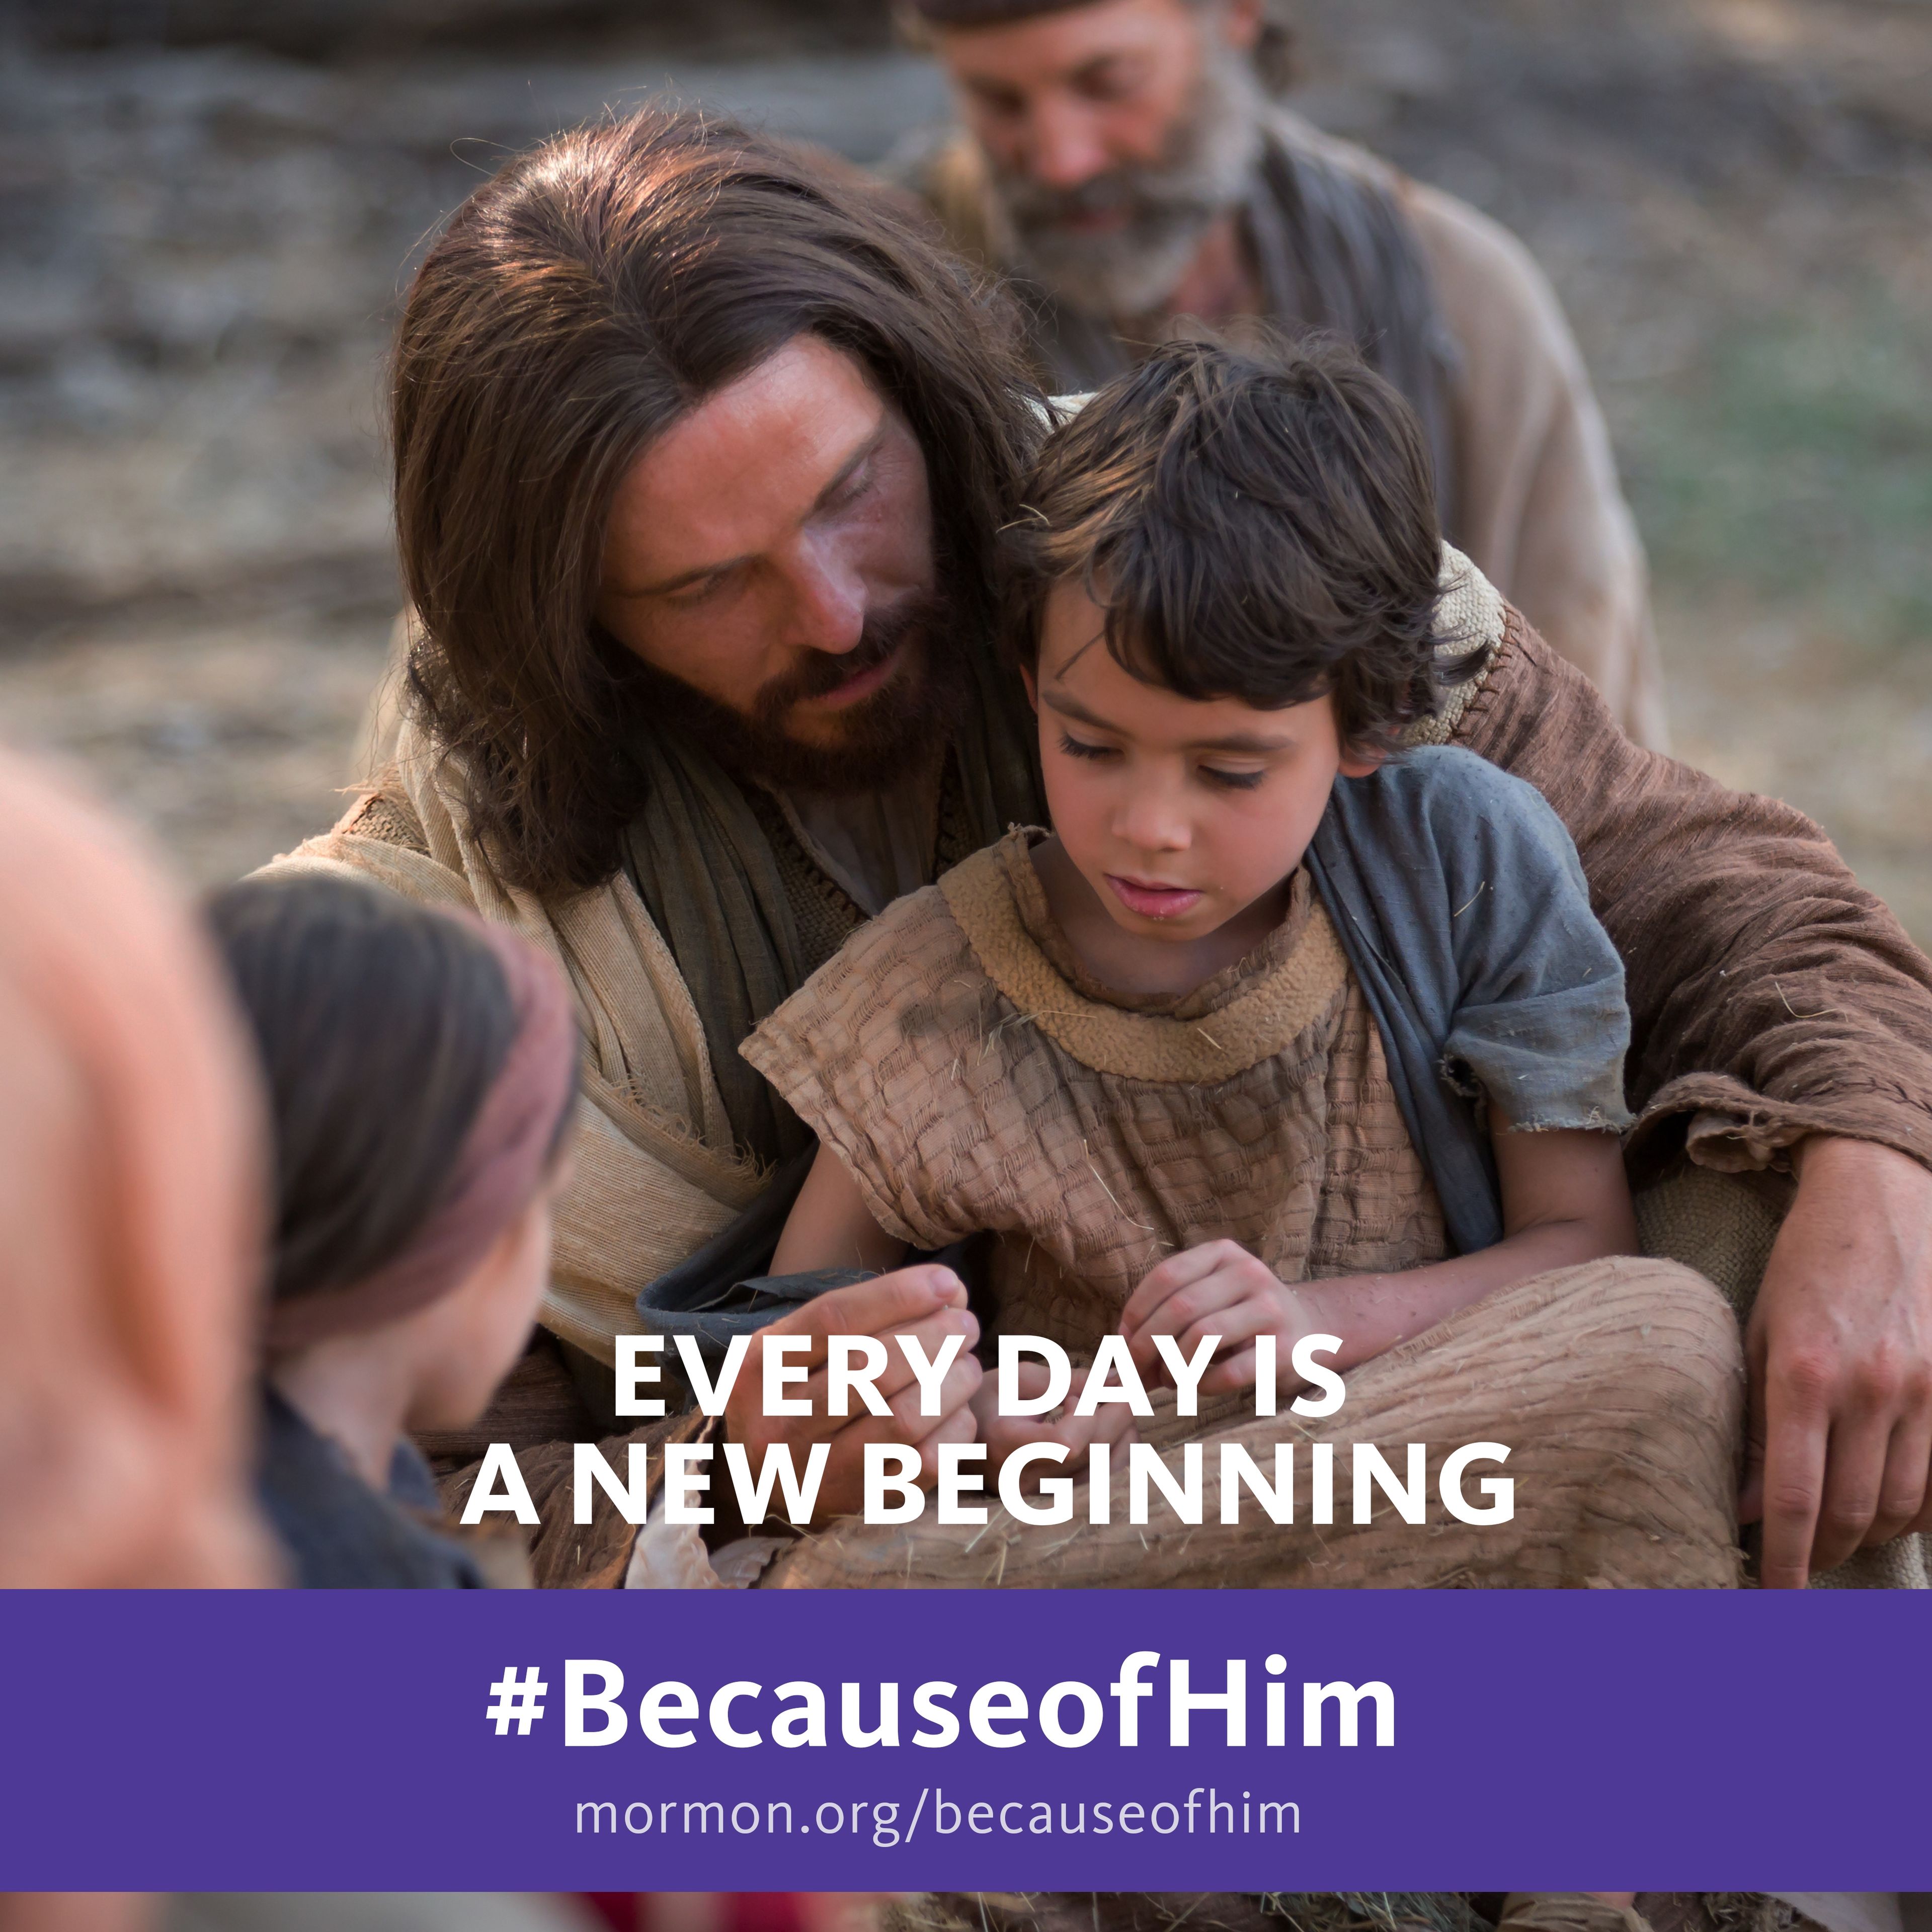 Every day is a new beginning. #BecauseofHim, mormon.org/becauseofhim © undefined ipCode 1.